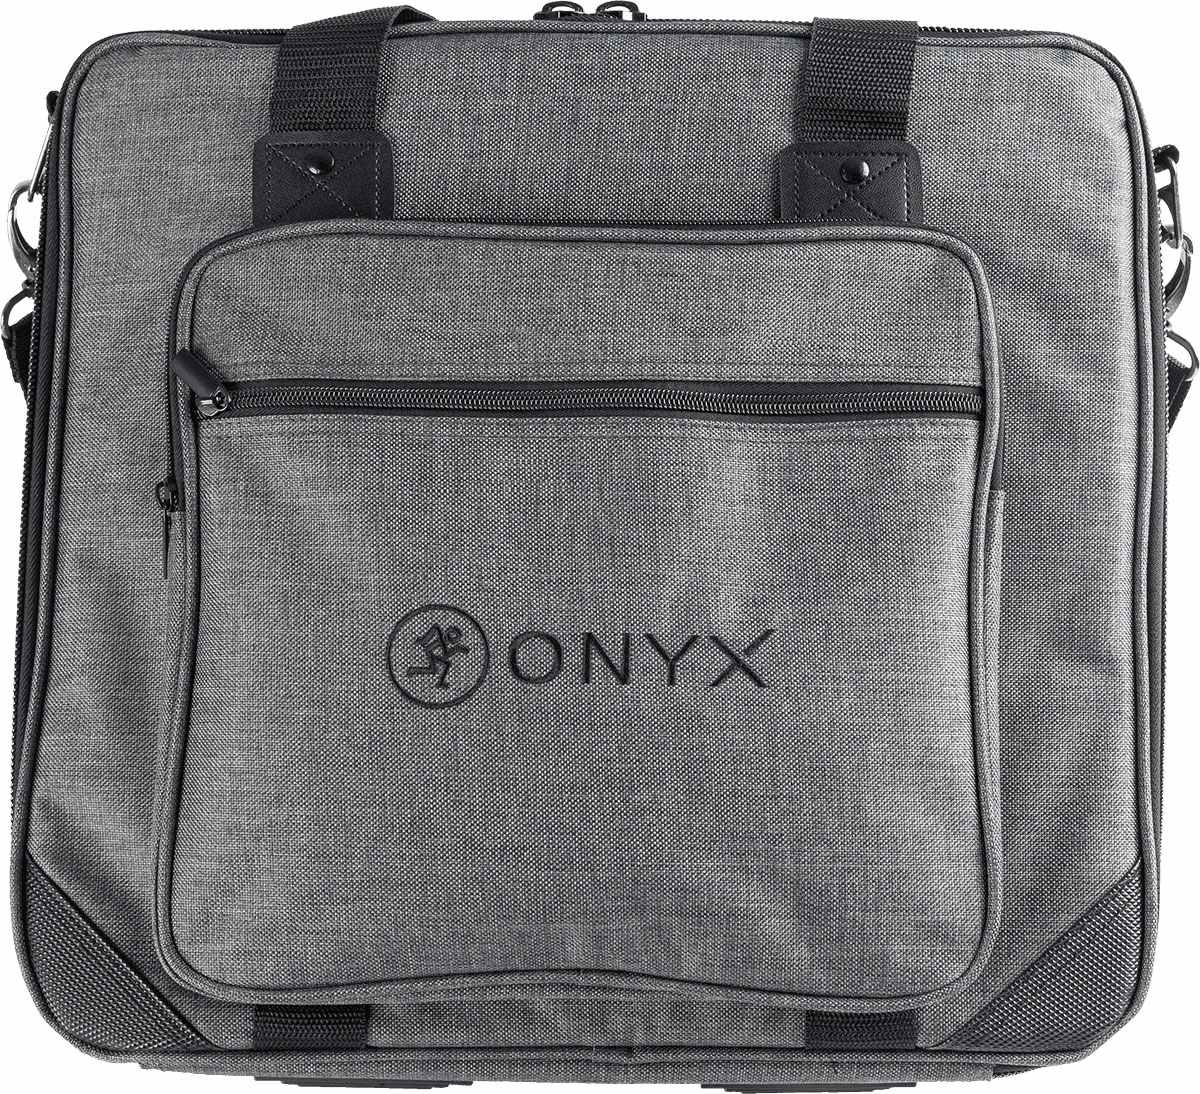 MACKIE CARRYING BAG FOR ONYX 12